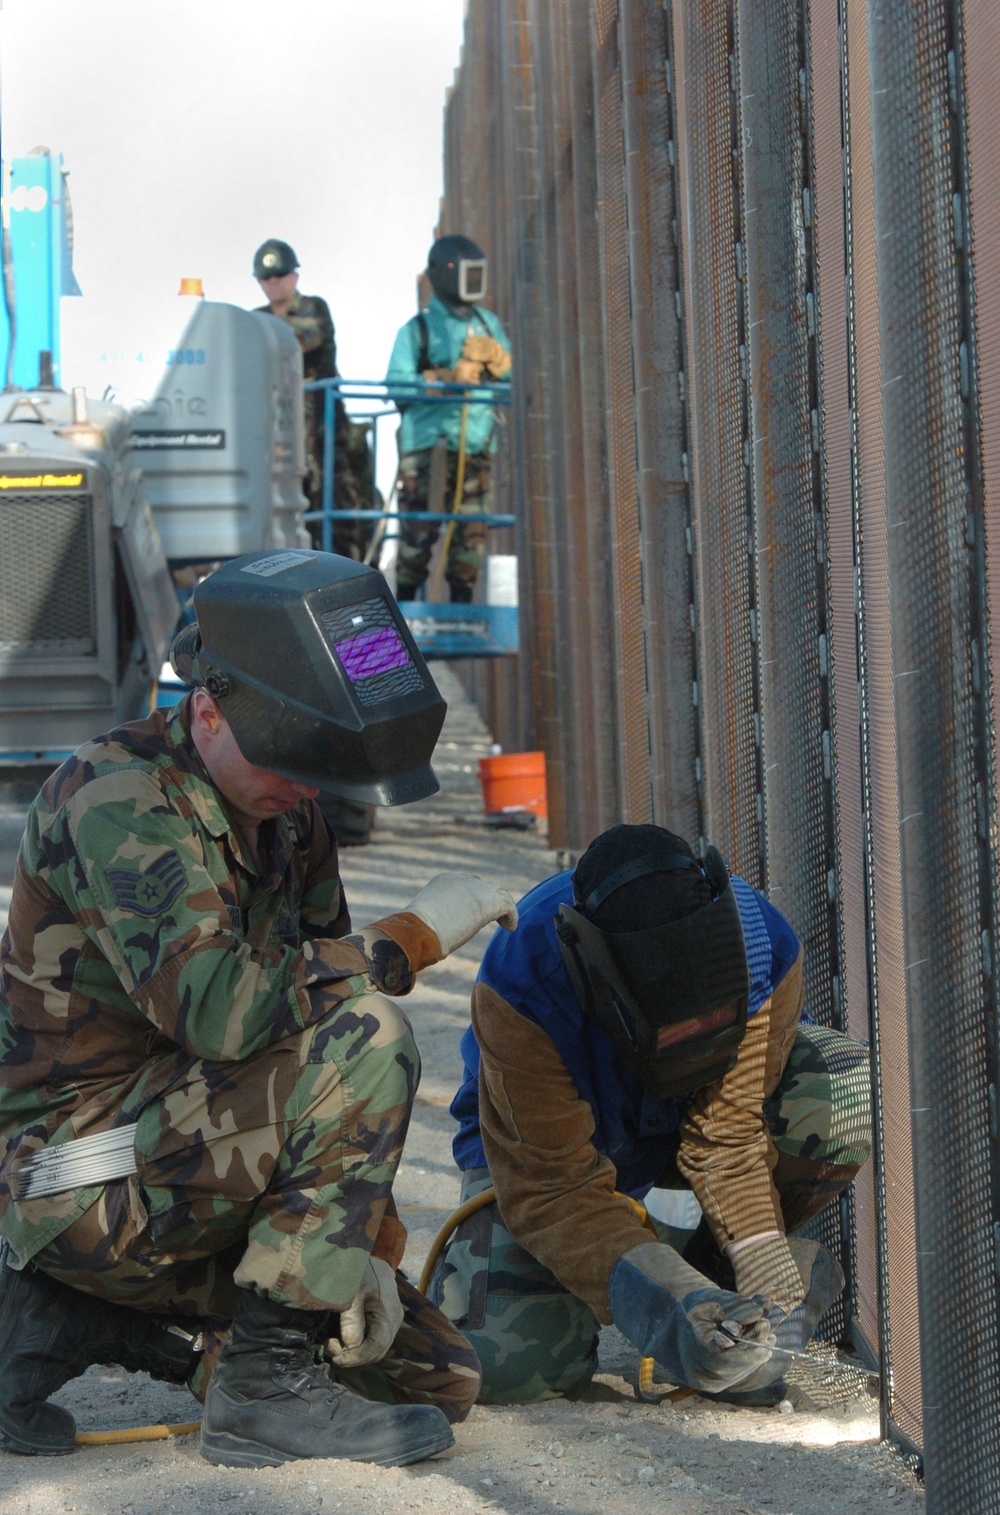 Oregon and Massachusetts ANG Civil Engineers team up during Operation Jump Start deployment